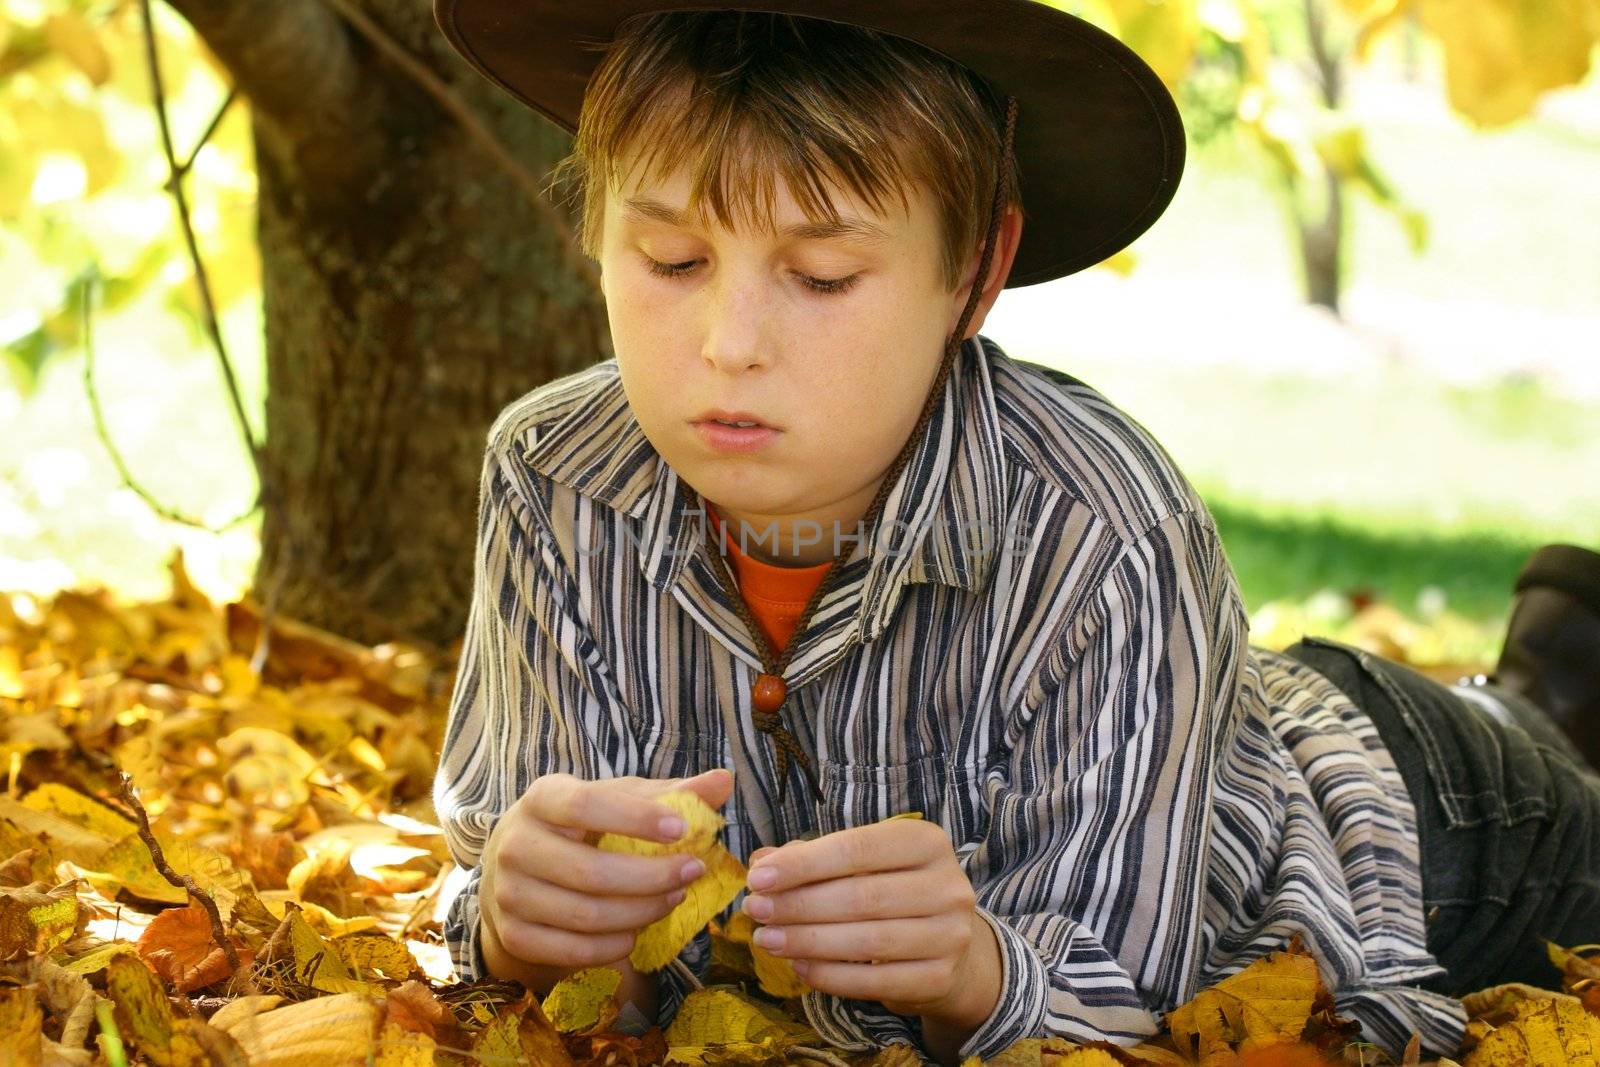 A child lays in golden yellow autumn foliage under a deciduous tree - 400iso